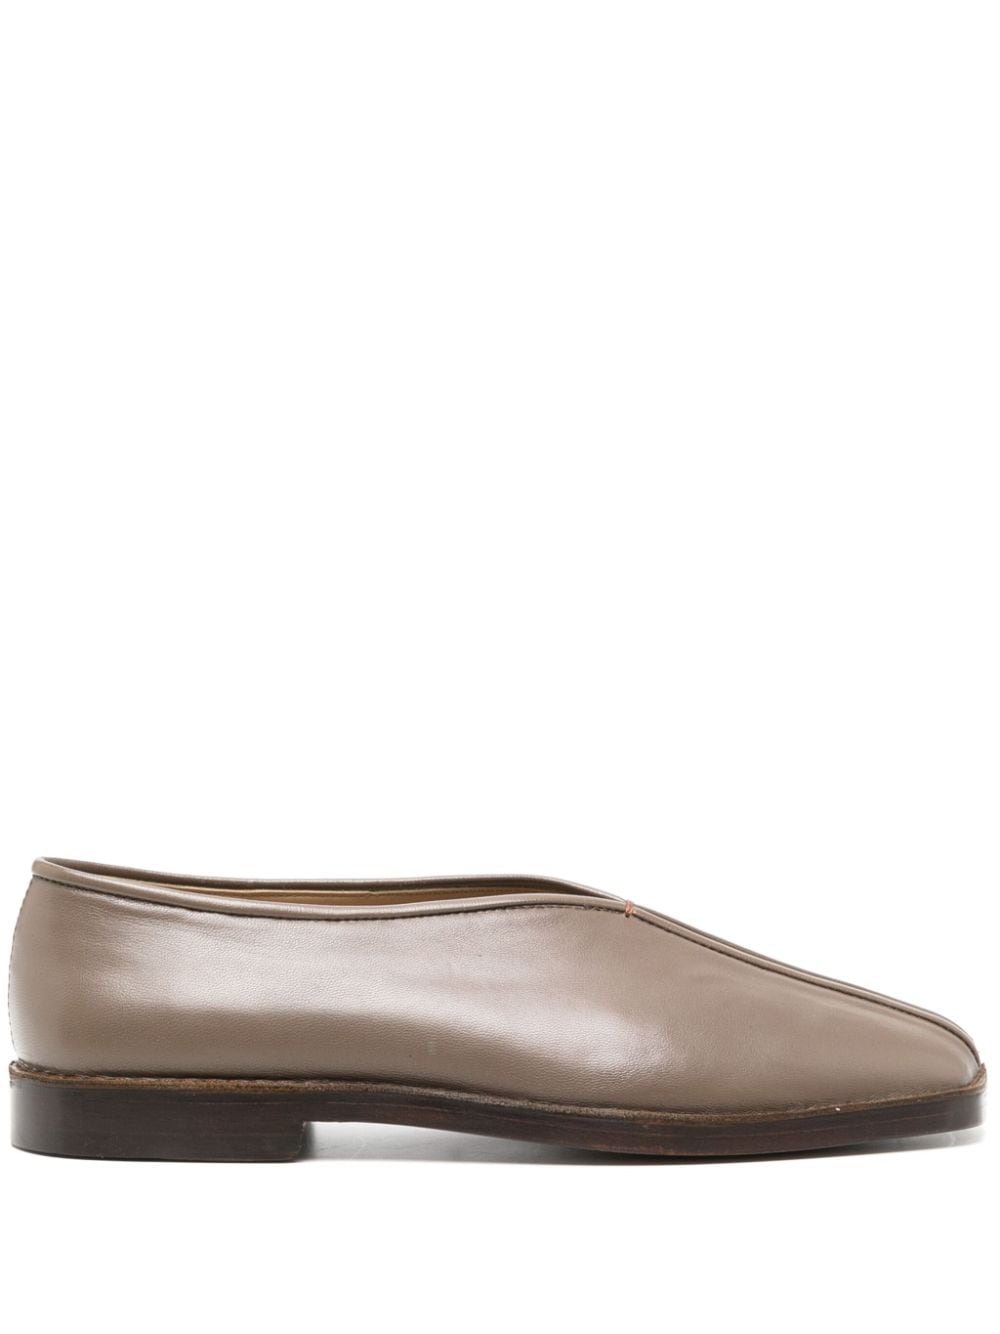 LEMAIRE Piped Leather Slippers - Farfetch